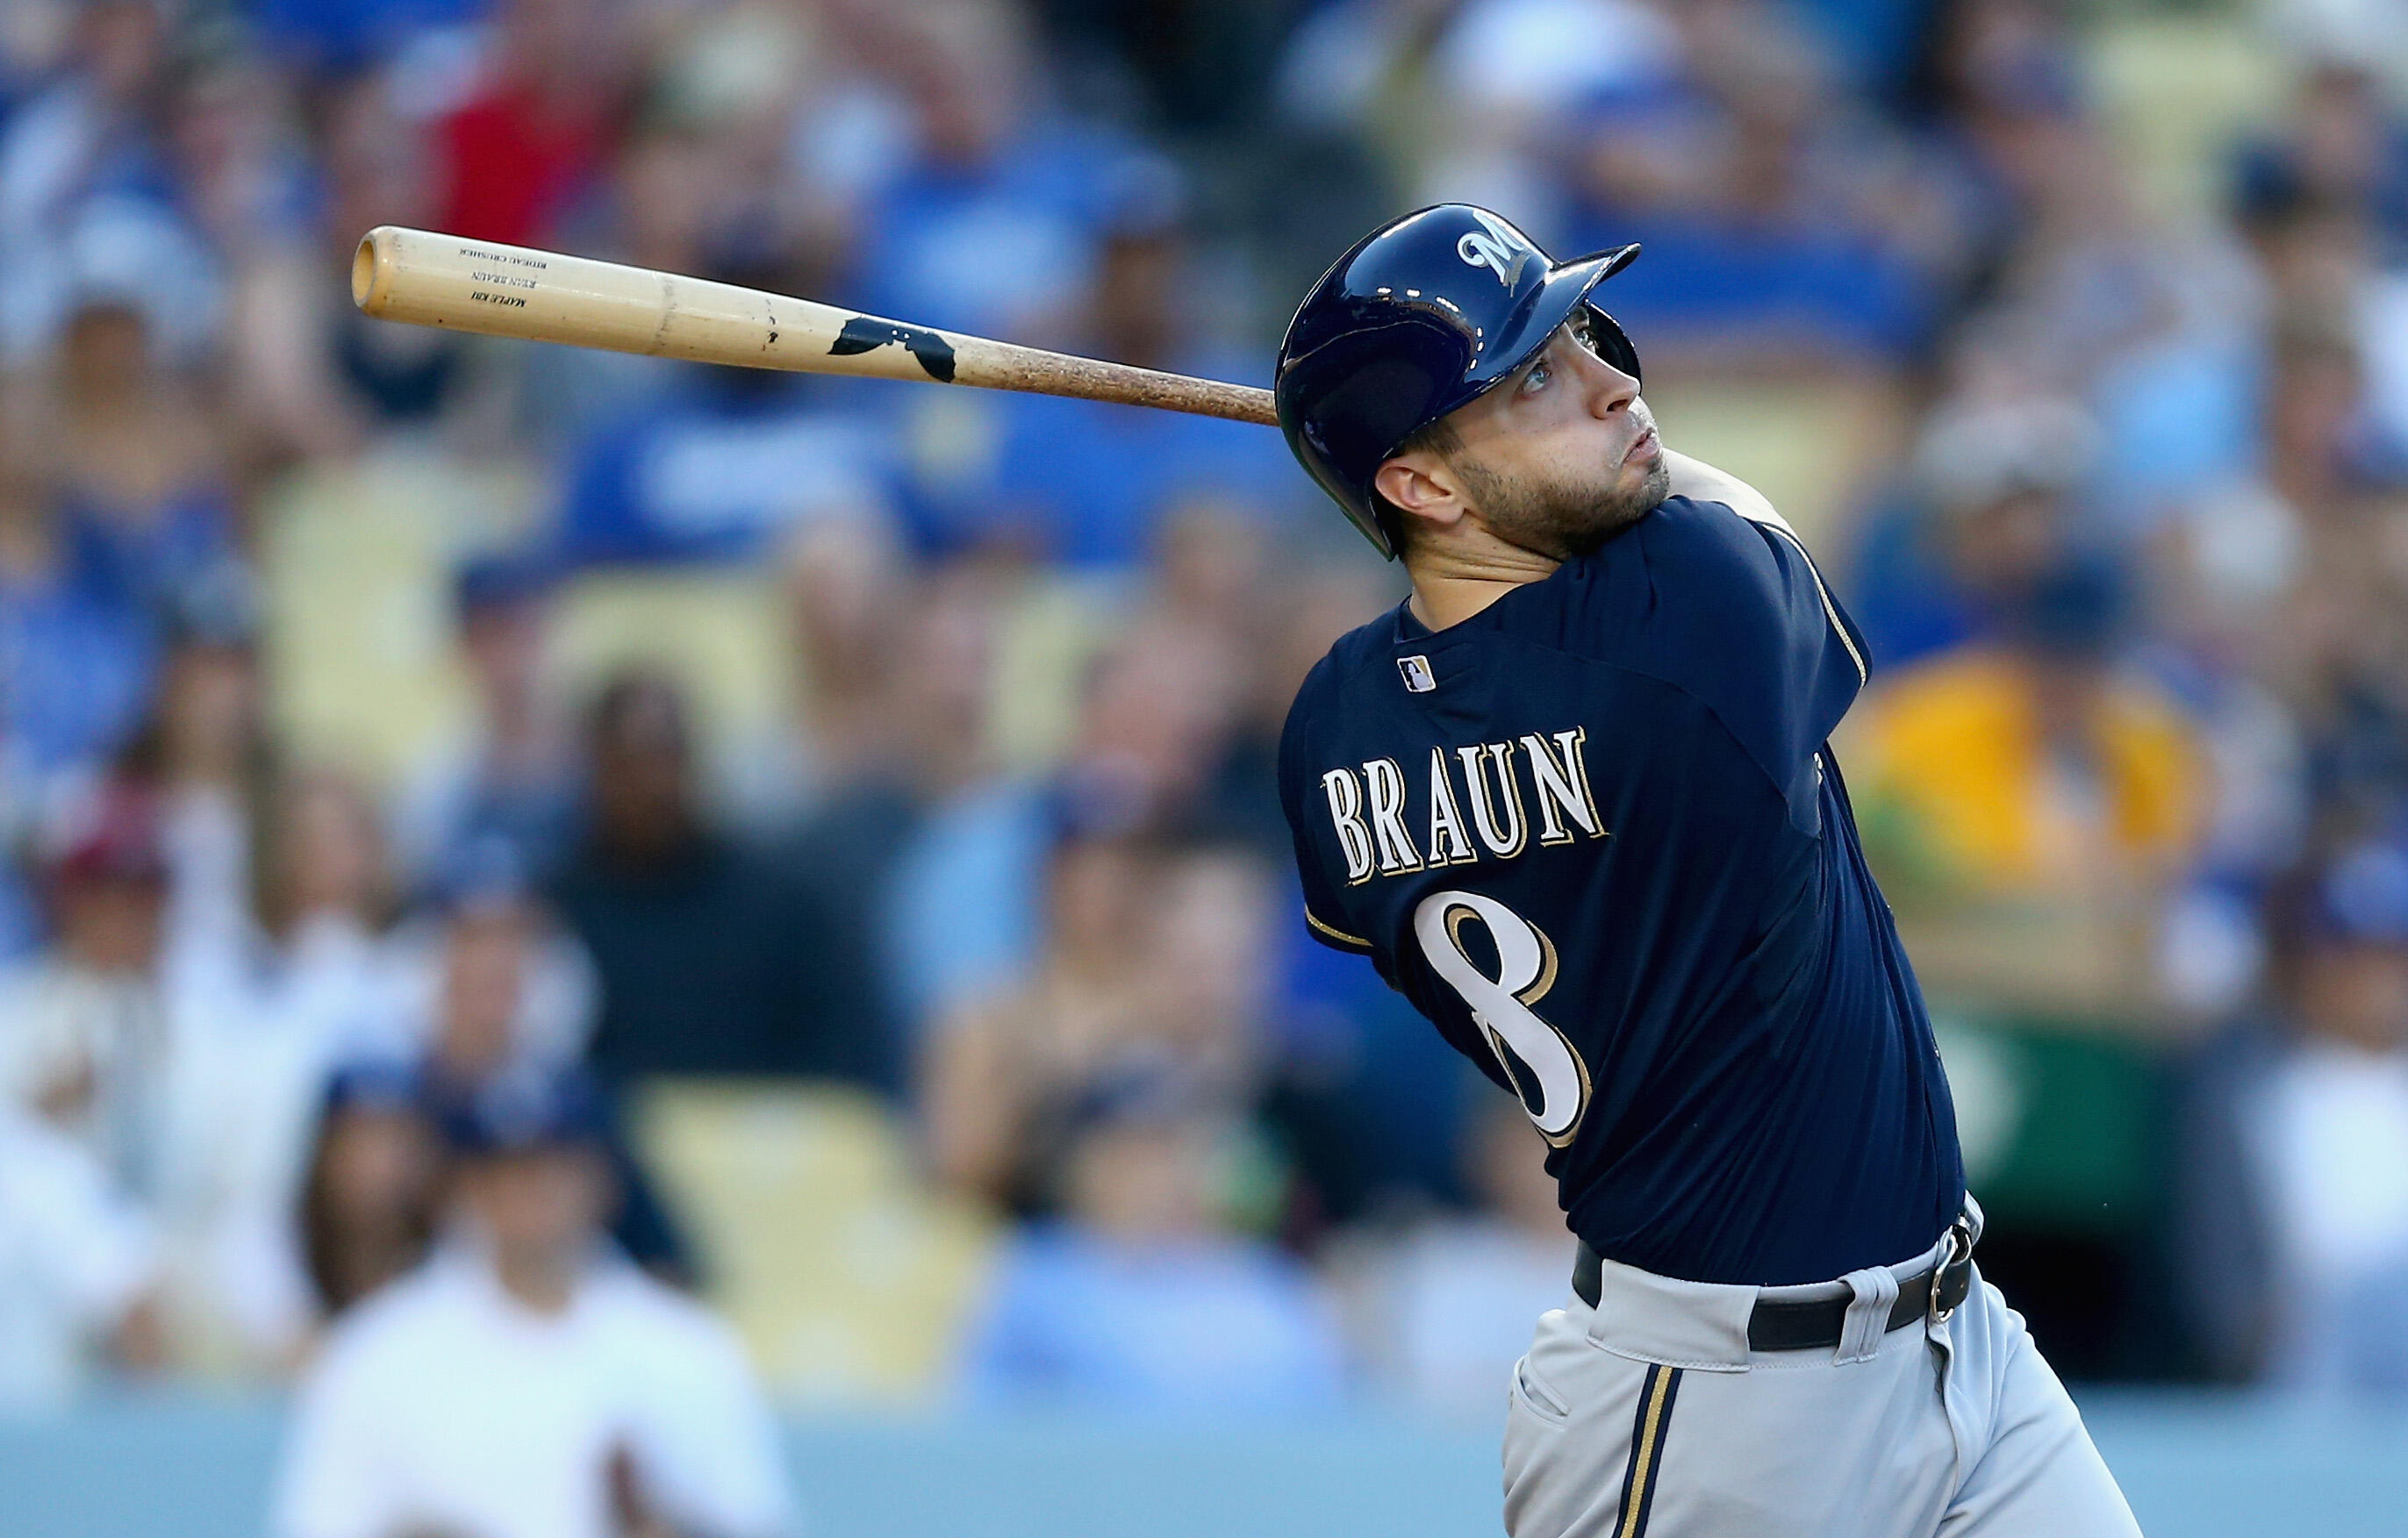 LOS ANGELES, CA - AUGUST 16:  Ryan Braun #8 of the Milwaukee Brewers hits a two-run homerun against the Los Angeles Dodgers in the fourth inning at Dodger Stadium on August 16, 2014 in Los Angeles, California.  (Photo by Jeff Gross/Getty Images)